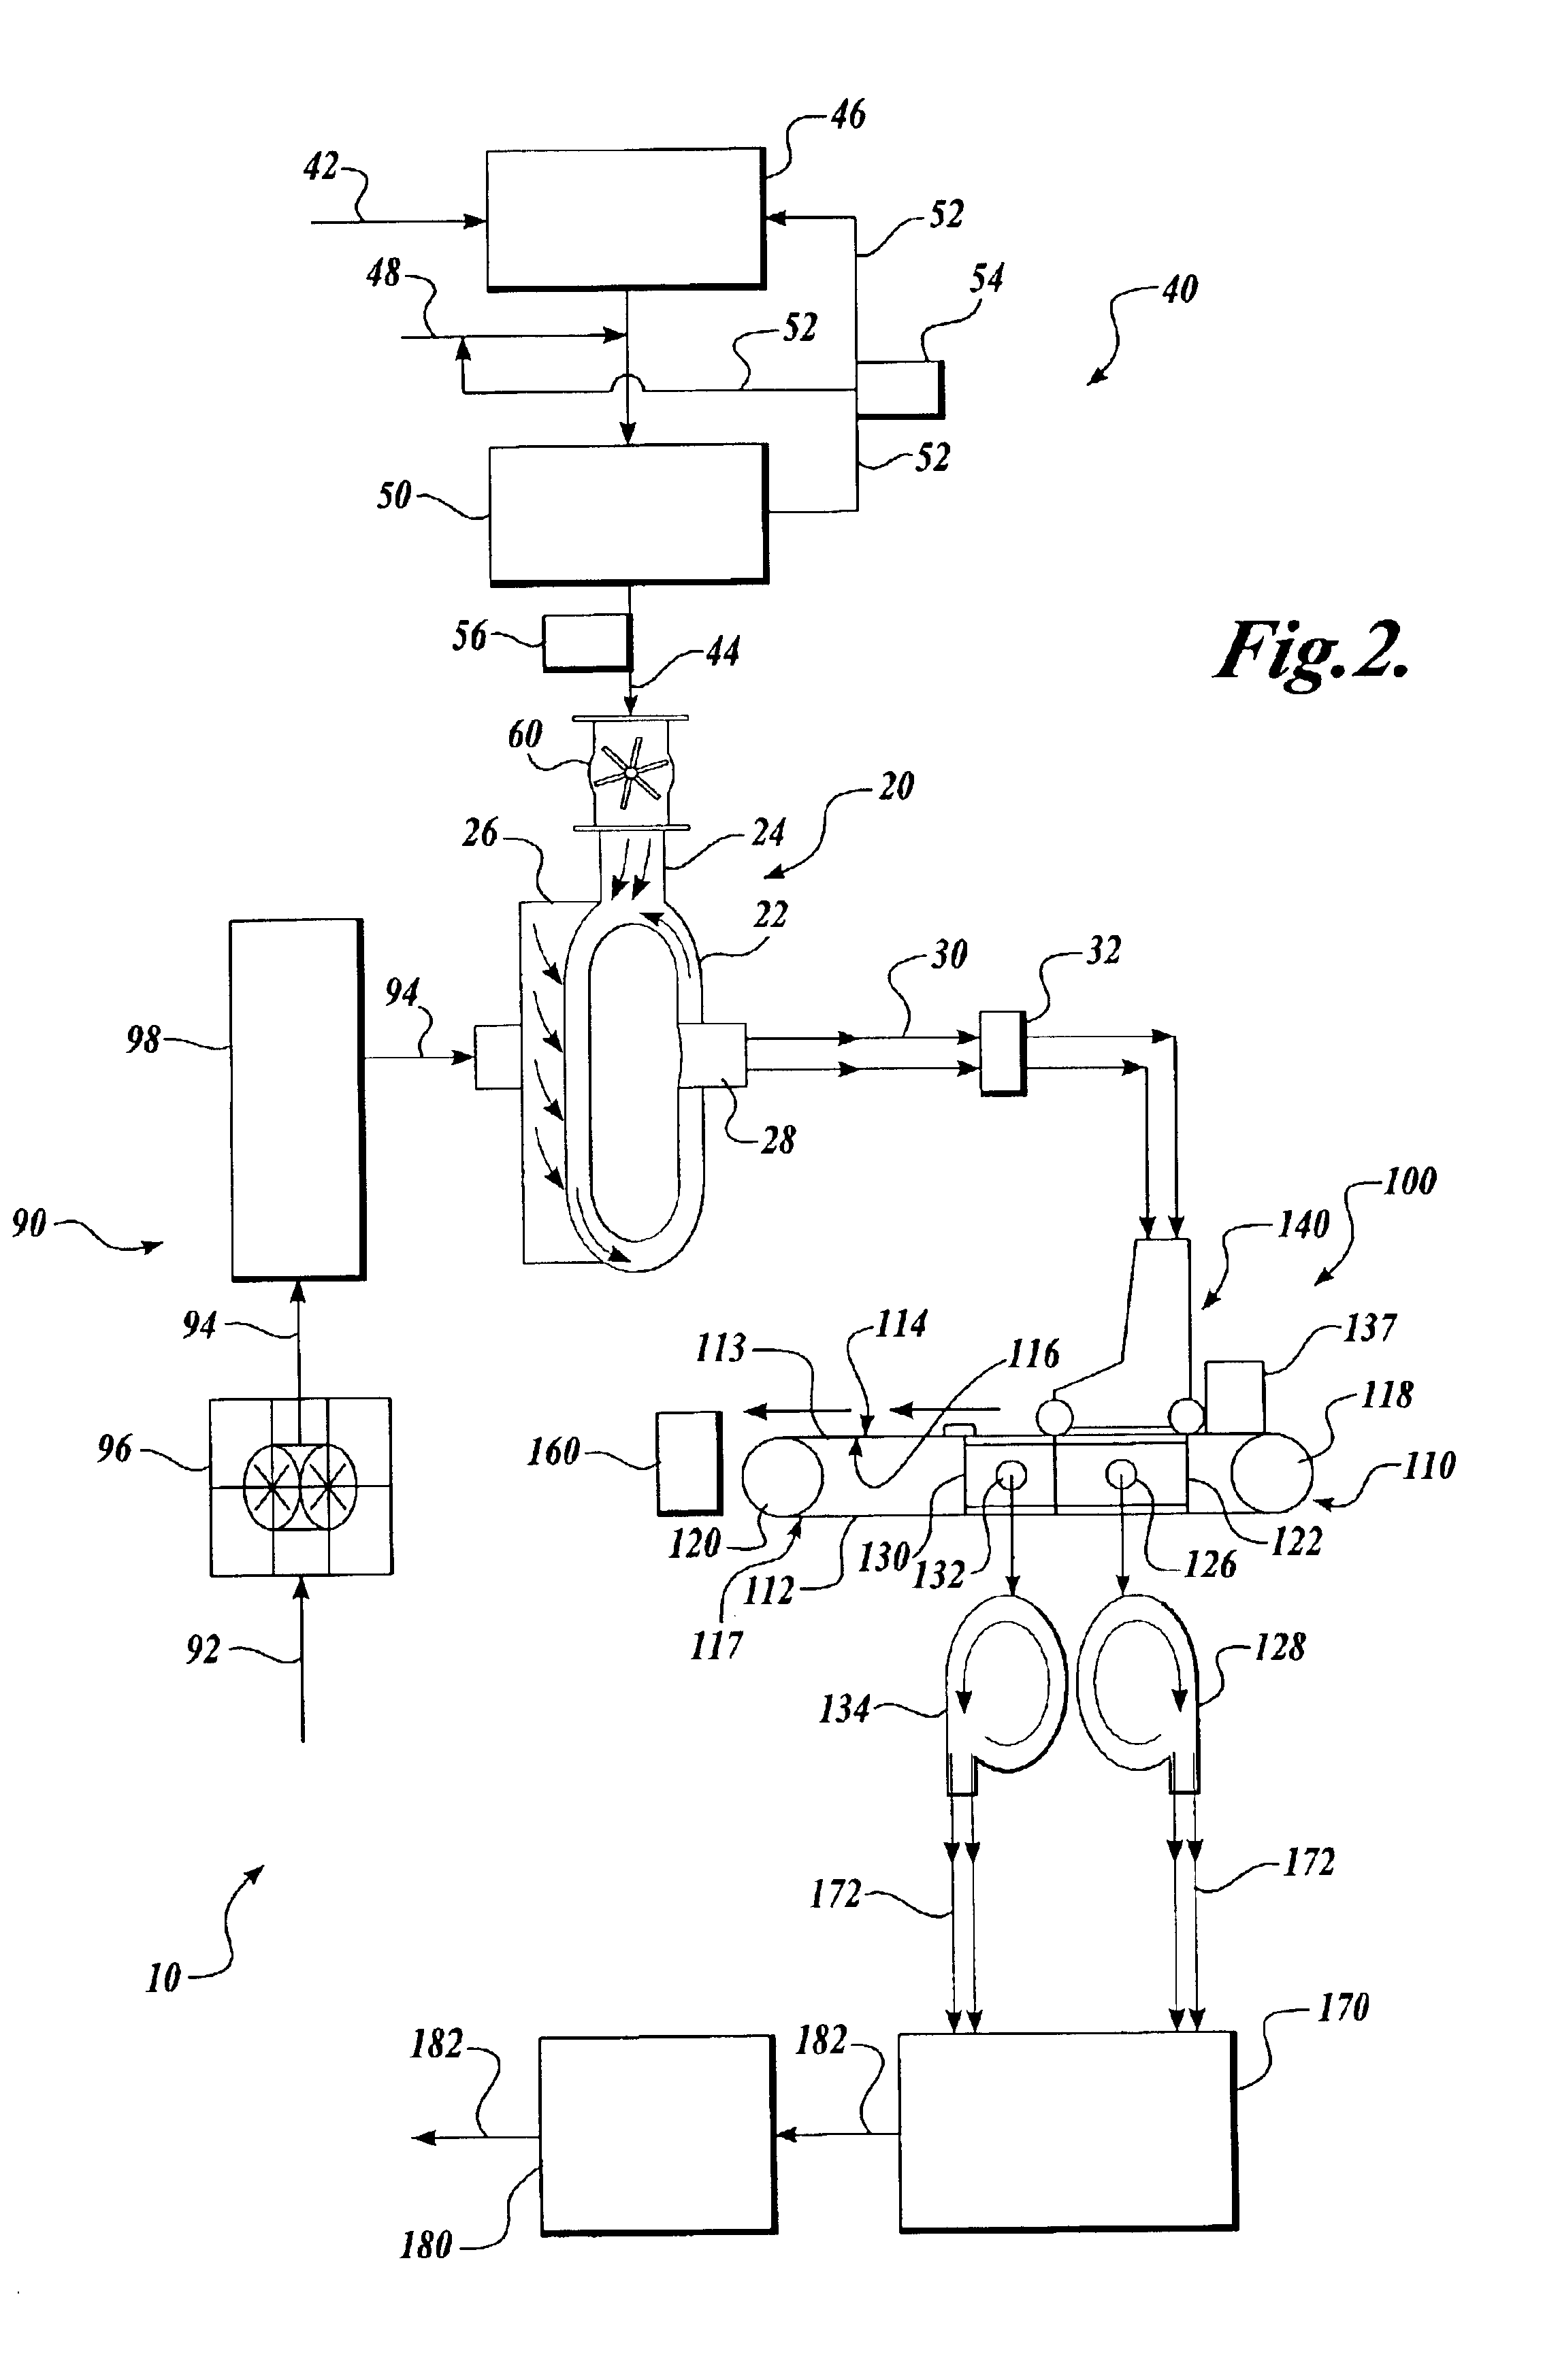 System for producing dried singulated cellulose pulp fibers using a jet drier and injected steam